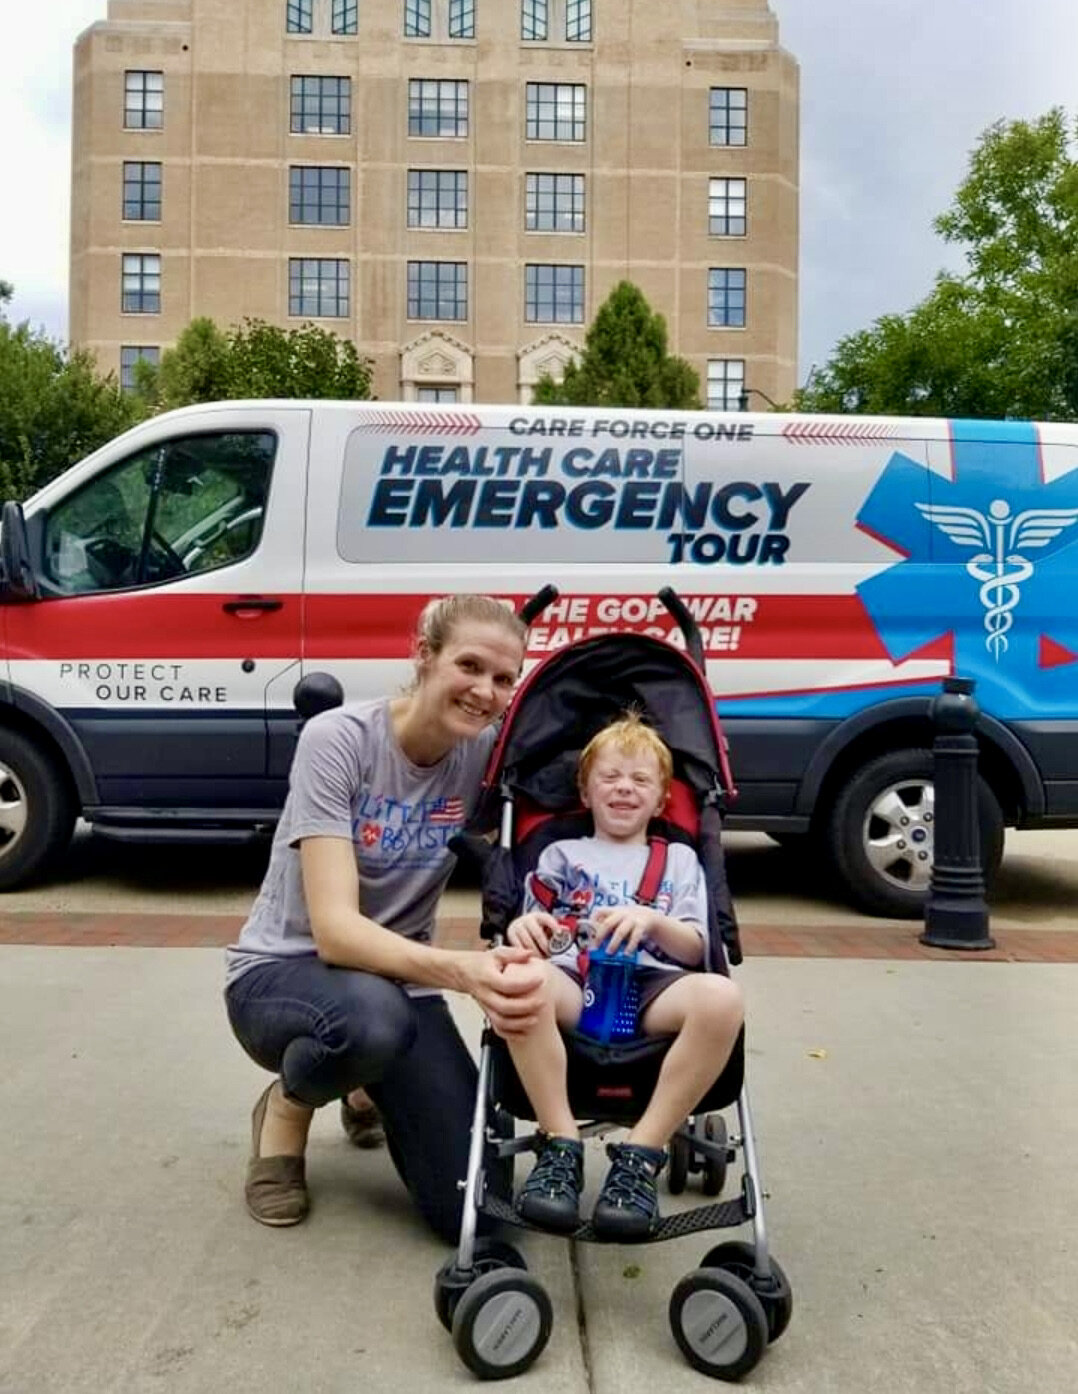  A mom poses with her child (who uses a disability stroller) in front of an ambulance during a health care public service campaign. 